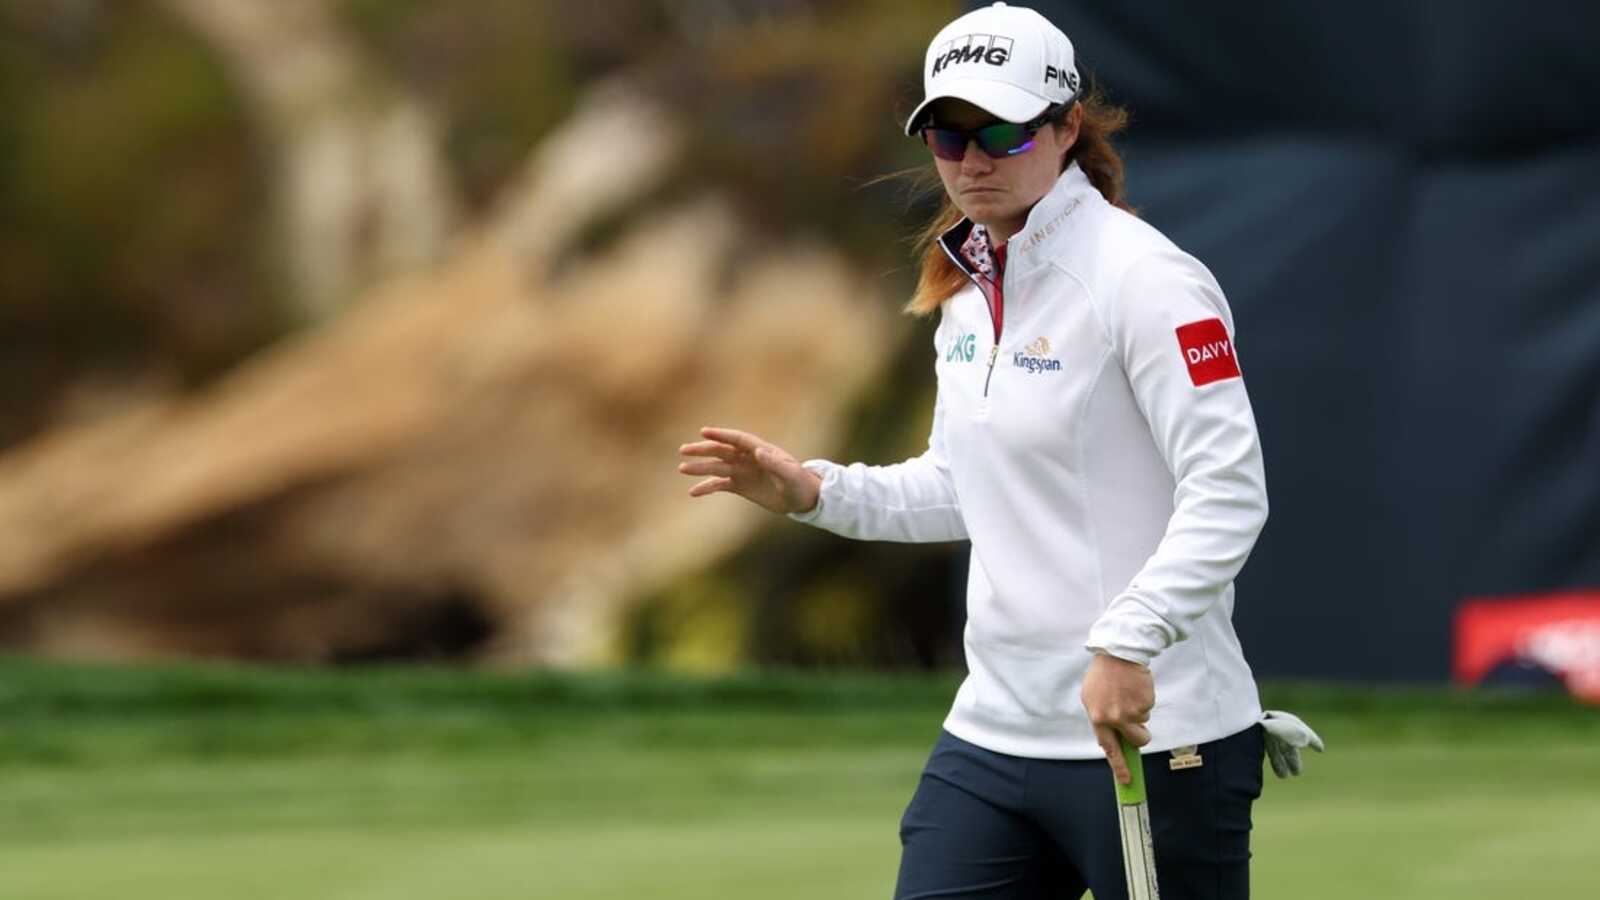 Leona Maguire cruises, Nelly Korda surges into Match Play quarters